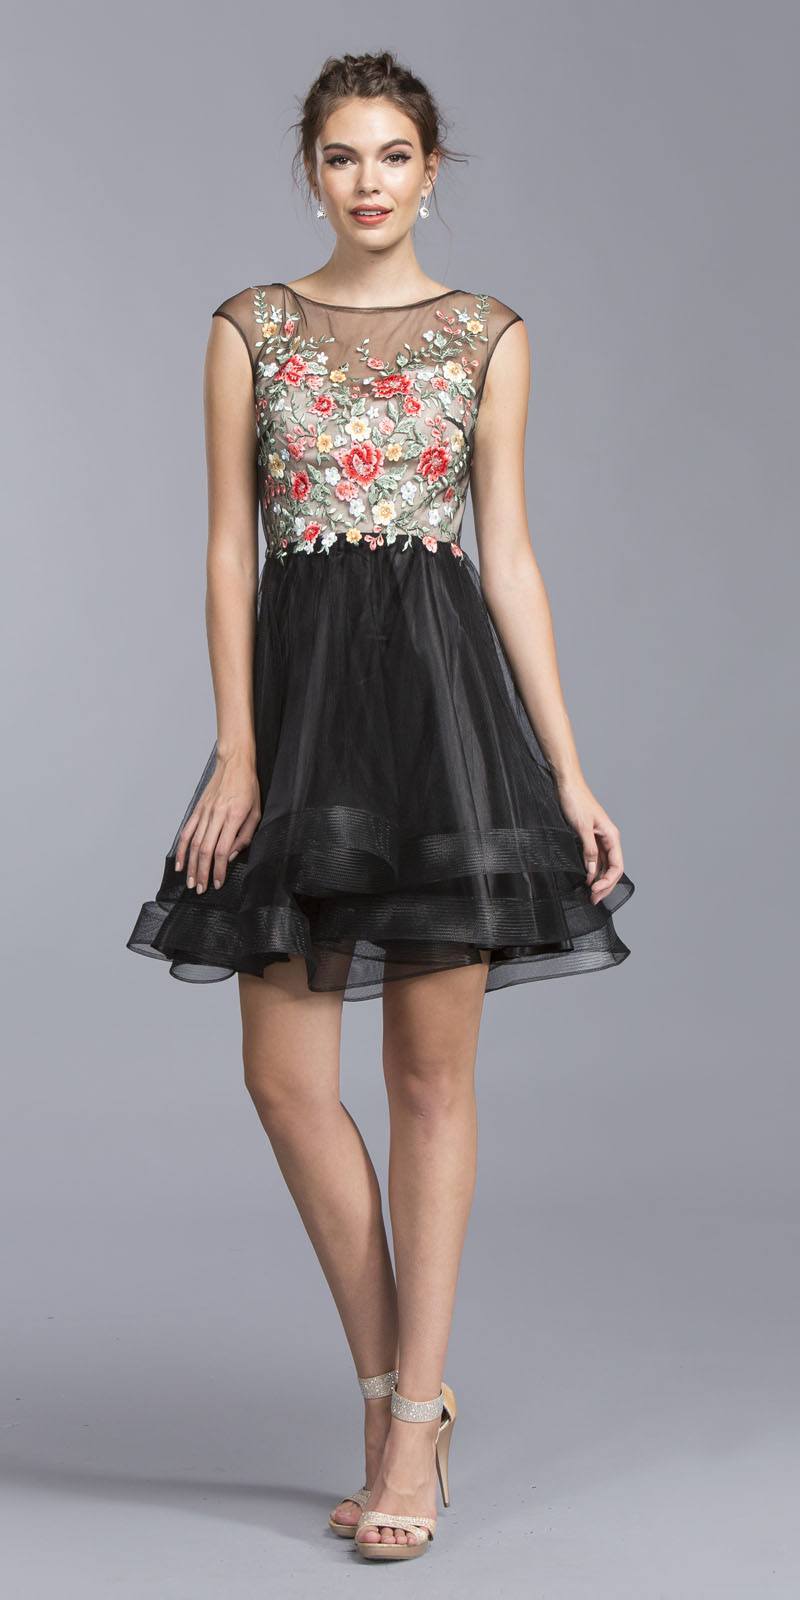 Black Cap Sleeves Embroidered Homecoming Short Dress